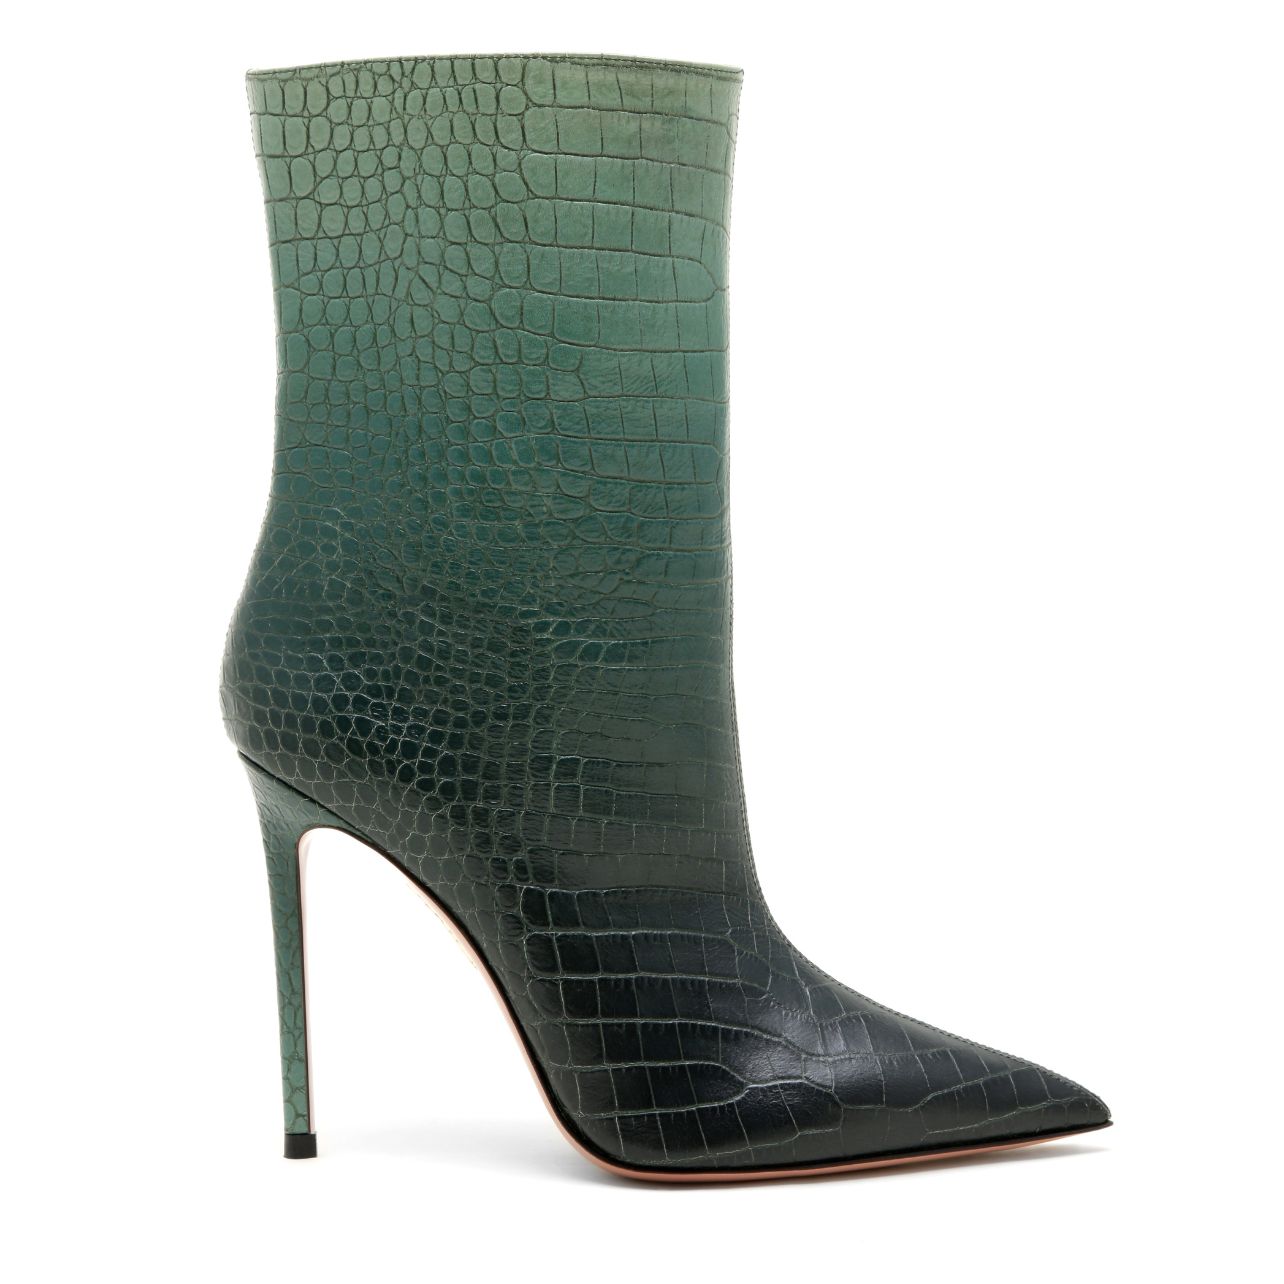 Green ankle height heeled bootie